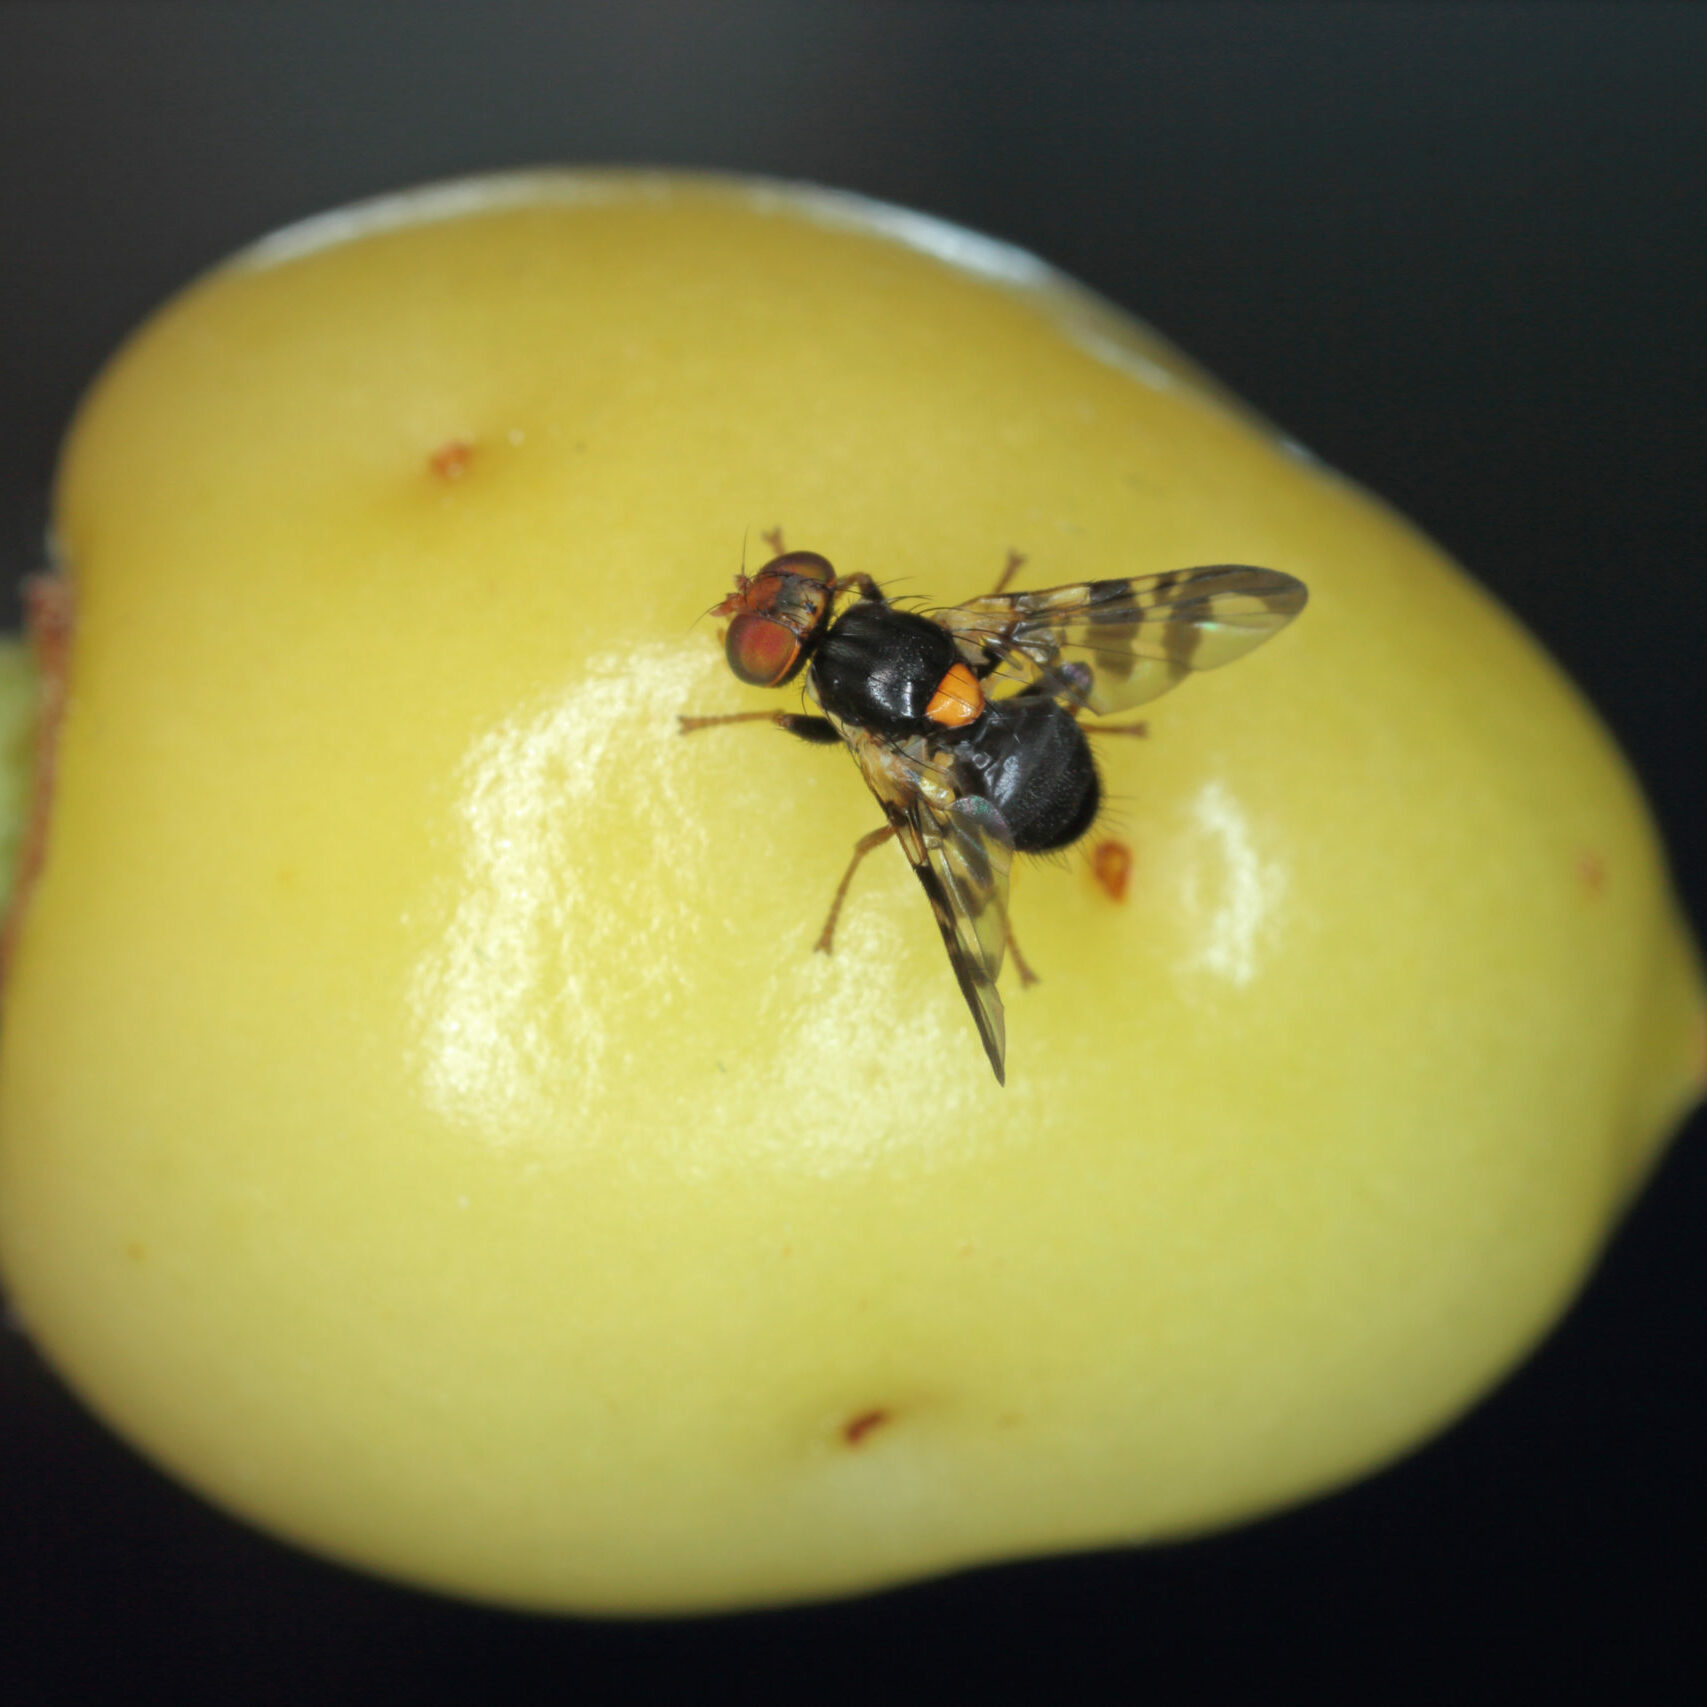 Rhagoletis,Cerasi,Is,A,Species,Of,Tephritid,Fruit,Fly,Known